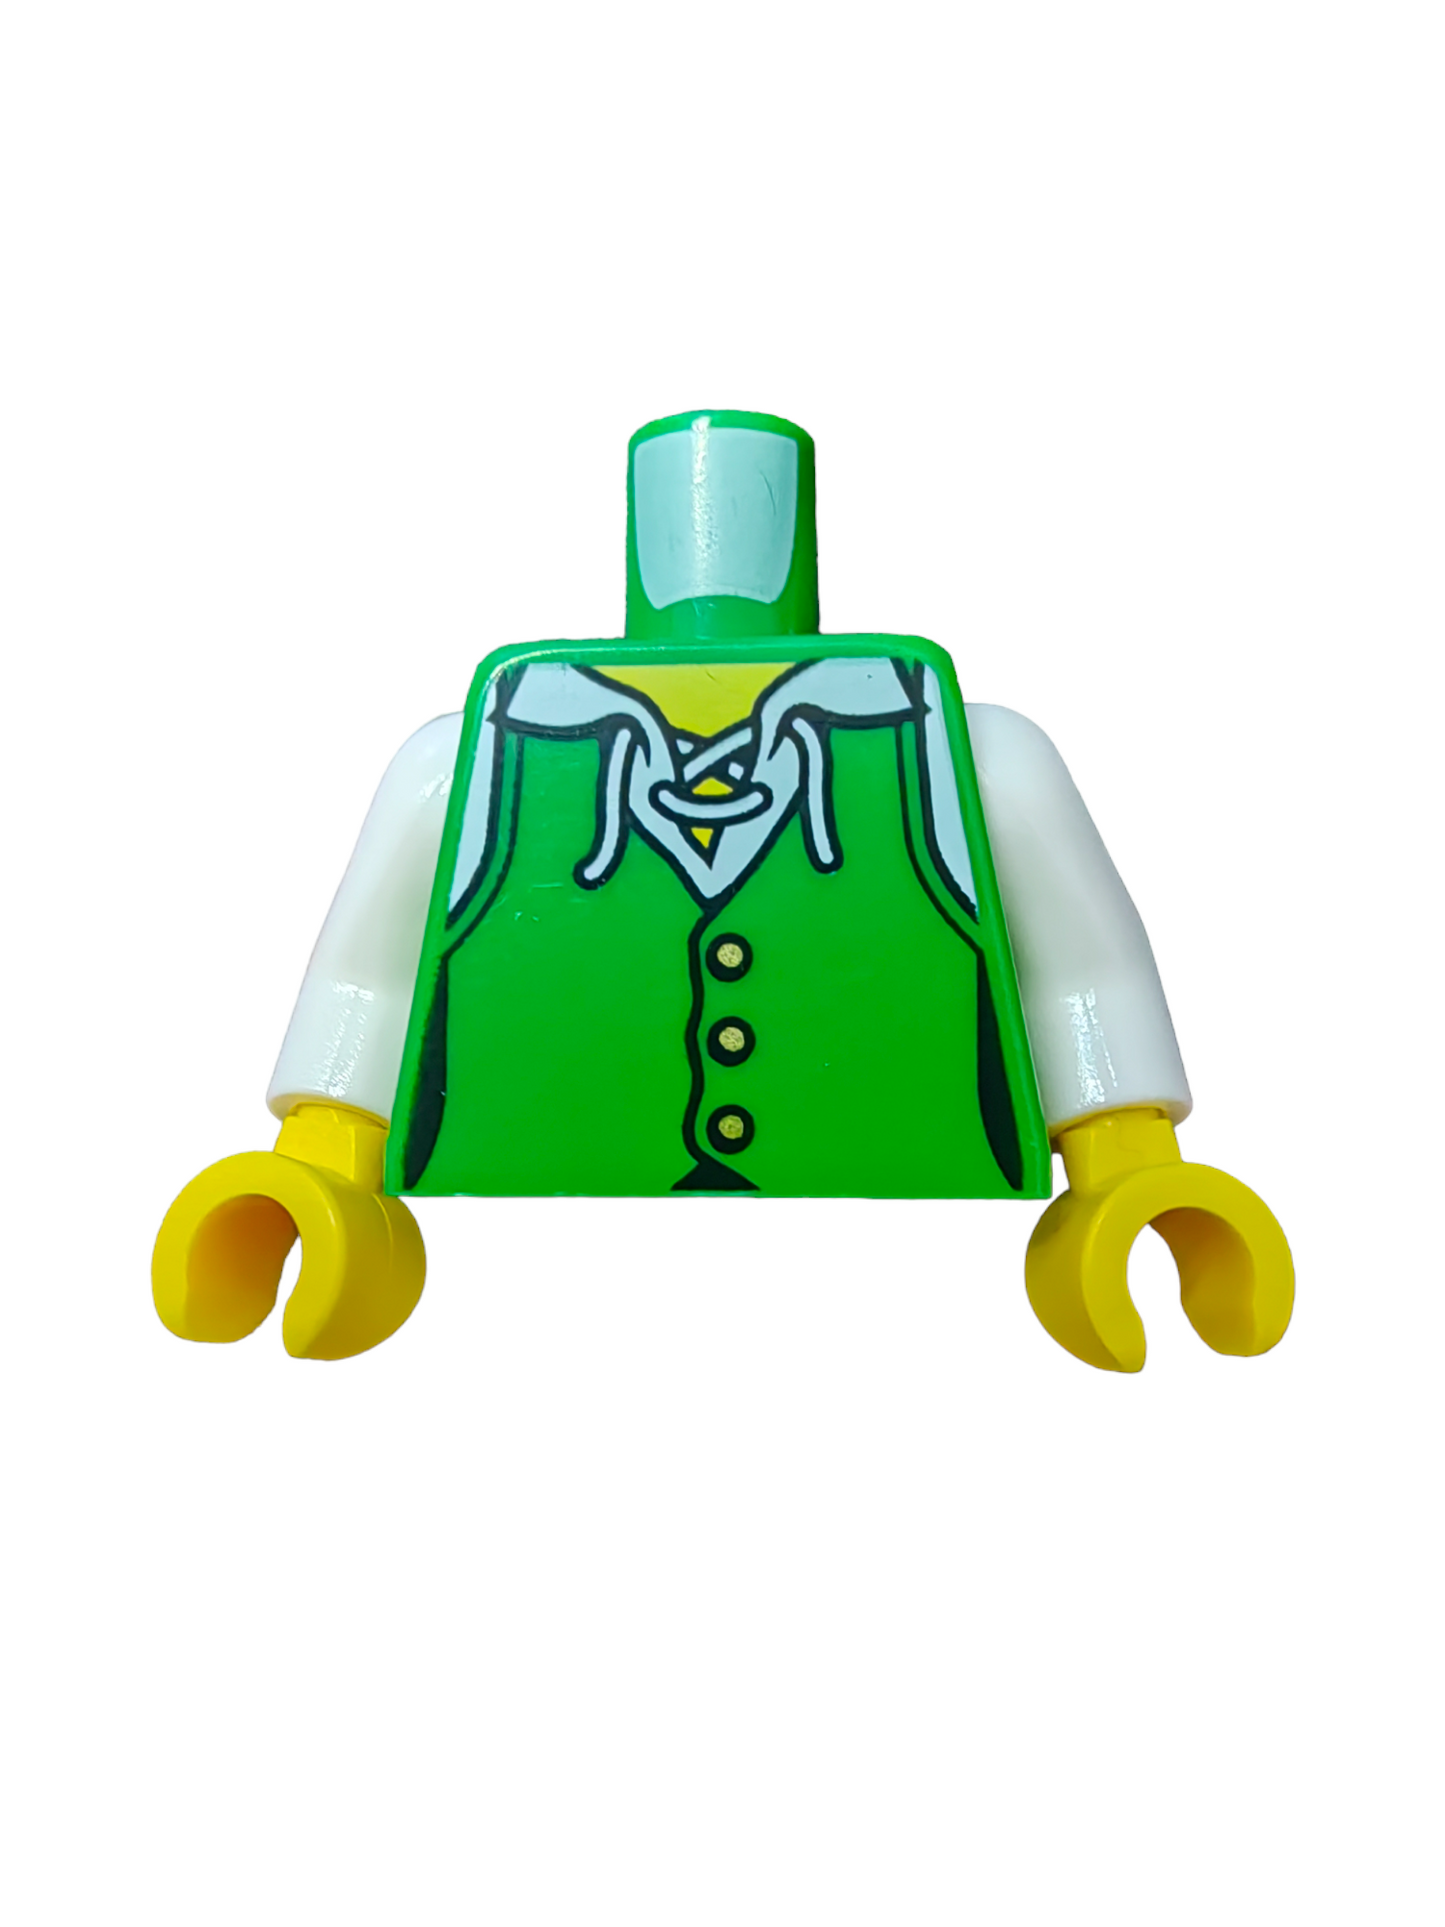 LEGO Torso, Pirate Vest with Gold Buttons  - UB1106